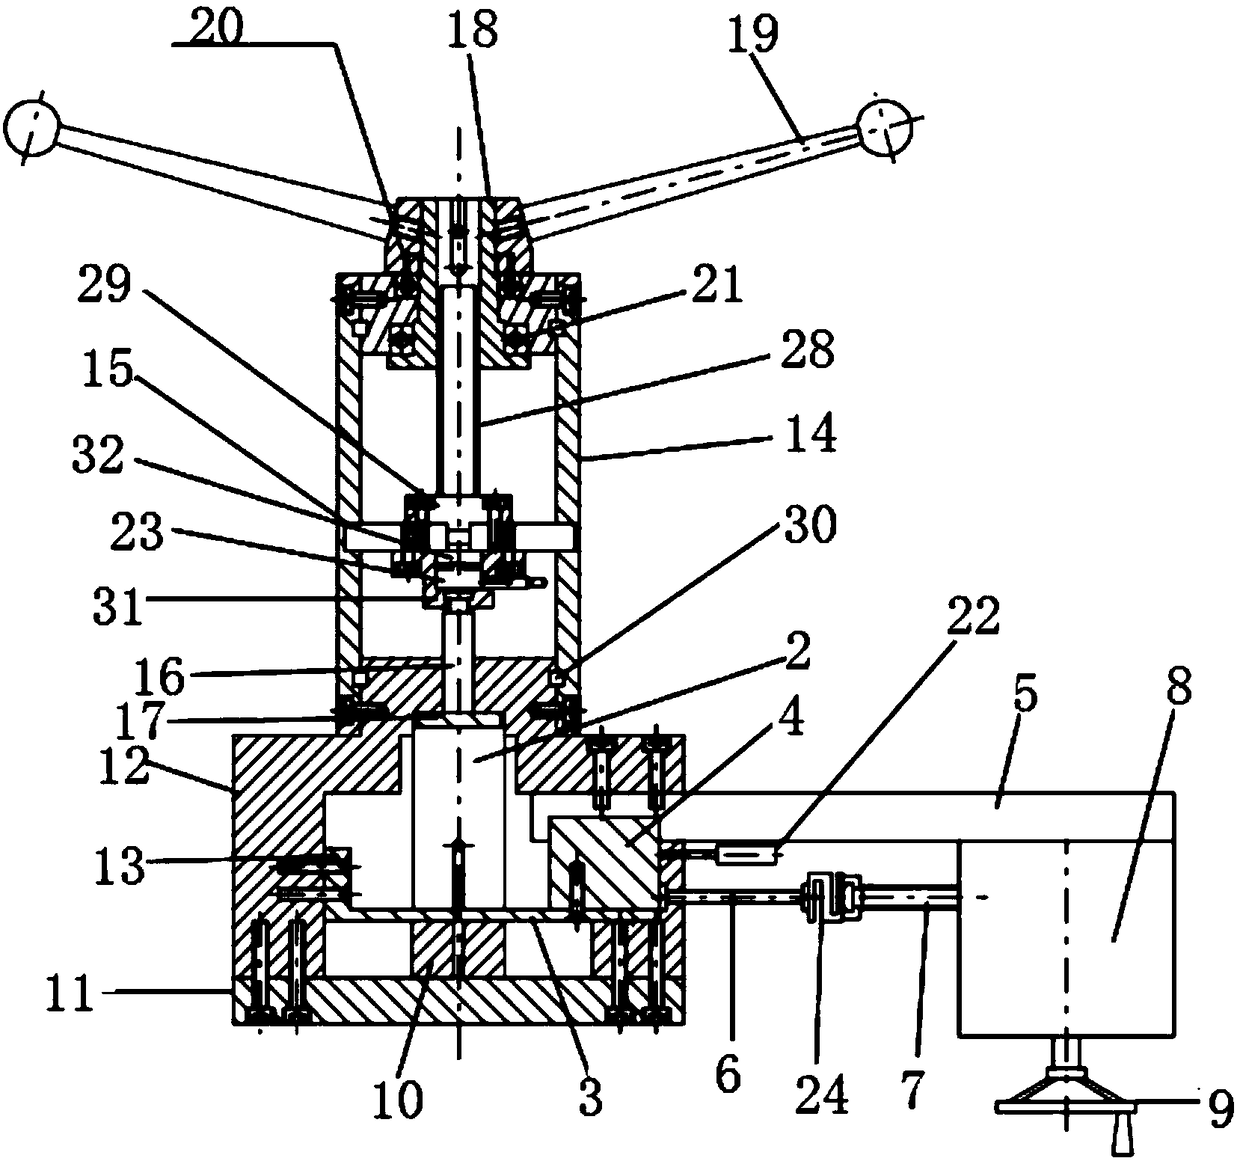 DCB (double-cantilever beam) fracture toughness testing device